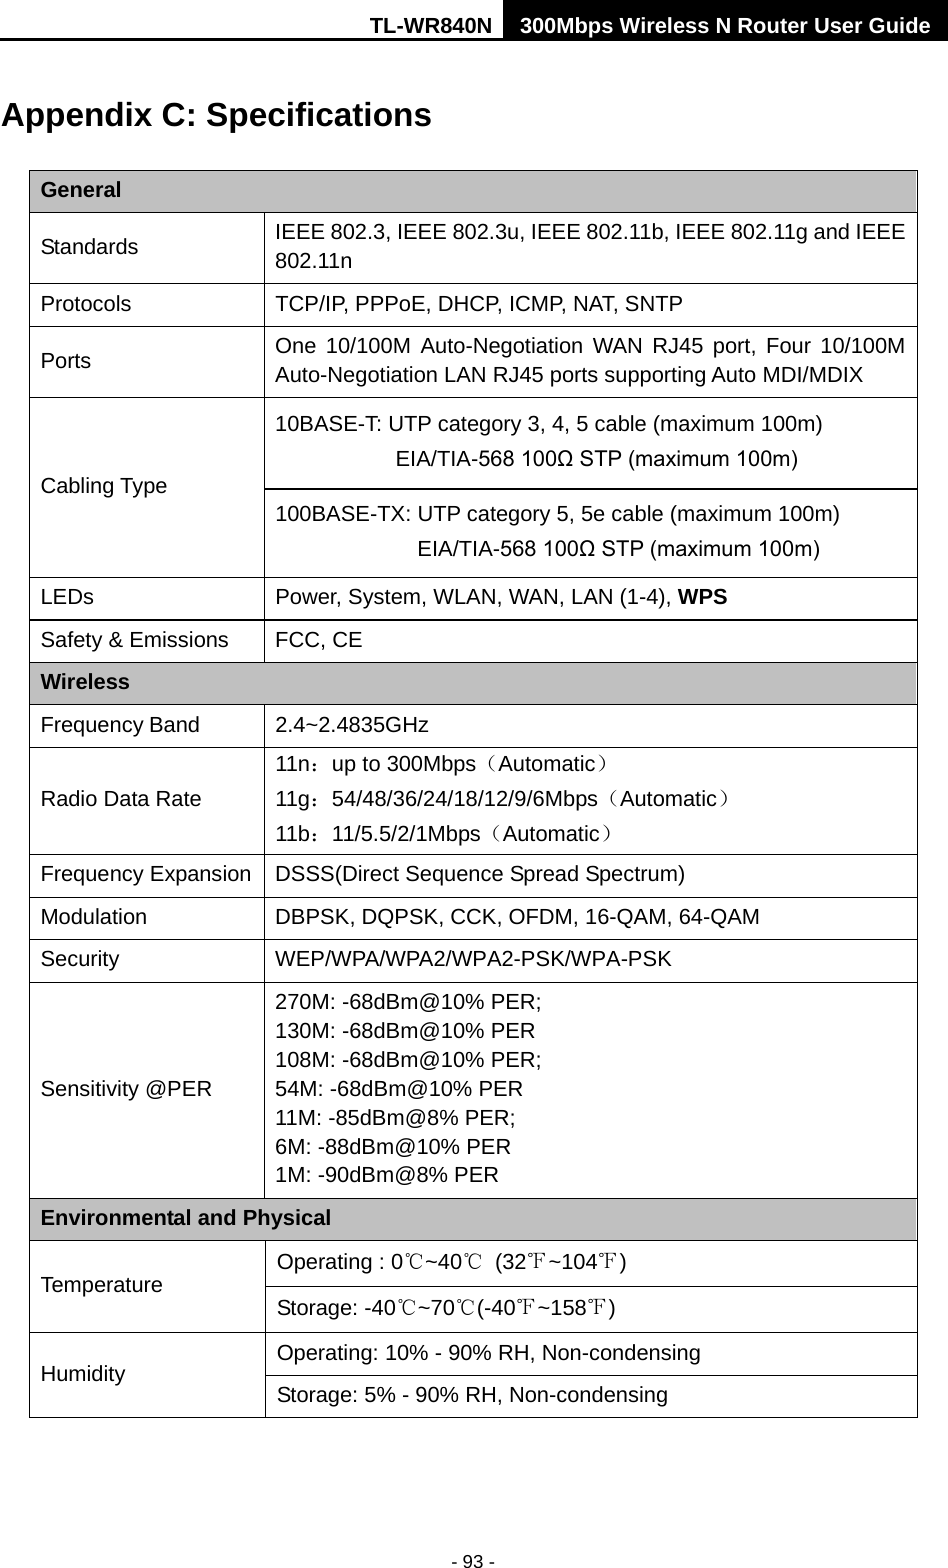 TL-WR840N 300Mbps Wireless N Router User Guide  - 93 - Appendix C: Specifications General Standards IEEE 802.3, IEEE 802.3u, IEEE 802.11b, IEEE 802.11g and IEEE 802.11n Protocols TCP/IP, PPPoE, DHCP, ICMP, NAT, SNTP Ports One 10/100M Auto-Negotiation WAN RJ45 port, Four 10/100M Auto-Negotiation LAN RJ45 ports supporting Auto MDI/MDIX Cabling Type 10BASE-T: UTP category 3, 4, 5 cable (maximum 100m) EIA/TIA-568 100Ω STP (maximum 100m) 100BASE-TX: UTP category 5, 5e cable (maximum 100m) EIA/TIA-568 100Ω STP (maximum 100m) LEDs Power, System, WLAN, WAN, LAN (1-4), WPS Safety &amp; Emissions FCC, CE Wireless Frequency Band 2.4~2.4835GHz Radio Data Rate 11n：up to 300Mbps（Automatic） 11g：54/48/36/24/18/12/9/6Mbps（Automatic） 11b：11/5.5/2/1Mbps（Automatic） Frequency Expansion DSSS(Direct Sequence Spread Spectrum) Modulation DBPSK, DQPSK, CCK, OFDM, 16-QAM, 64-QAM Security WEP/WPA/WPA2/WPA2-PSK/WPA-PSK Sensitivity @PER 270M: -68dBm@10% PER; 130M: -68dBm@10% PER 108M: -68dBm@10% PER;   54M: -68dBm@10% PER 11M: -85dBm@8% PER;   6M: -88dBm@10% PER 1M: -90dBm@8% PER Environmental and Physical Temperature Operating : 0℃~40℃ (32℉~104℉) Storage: -40℃~70℃(-40℉~158℉) Humidity Operating: 10% - 90% RH, Non-condensing Storage: 5% - 90% RH, Non-condensing 